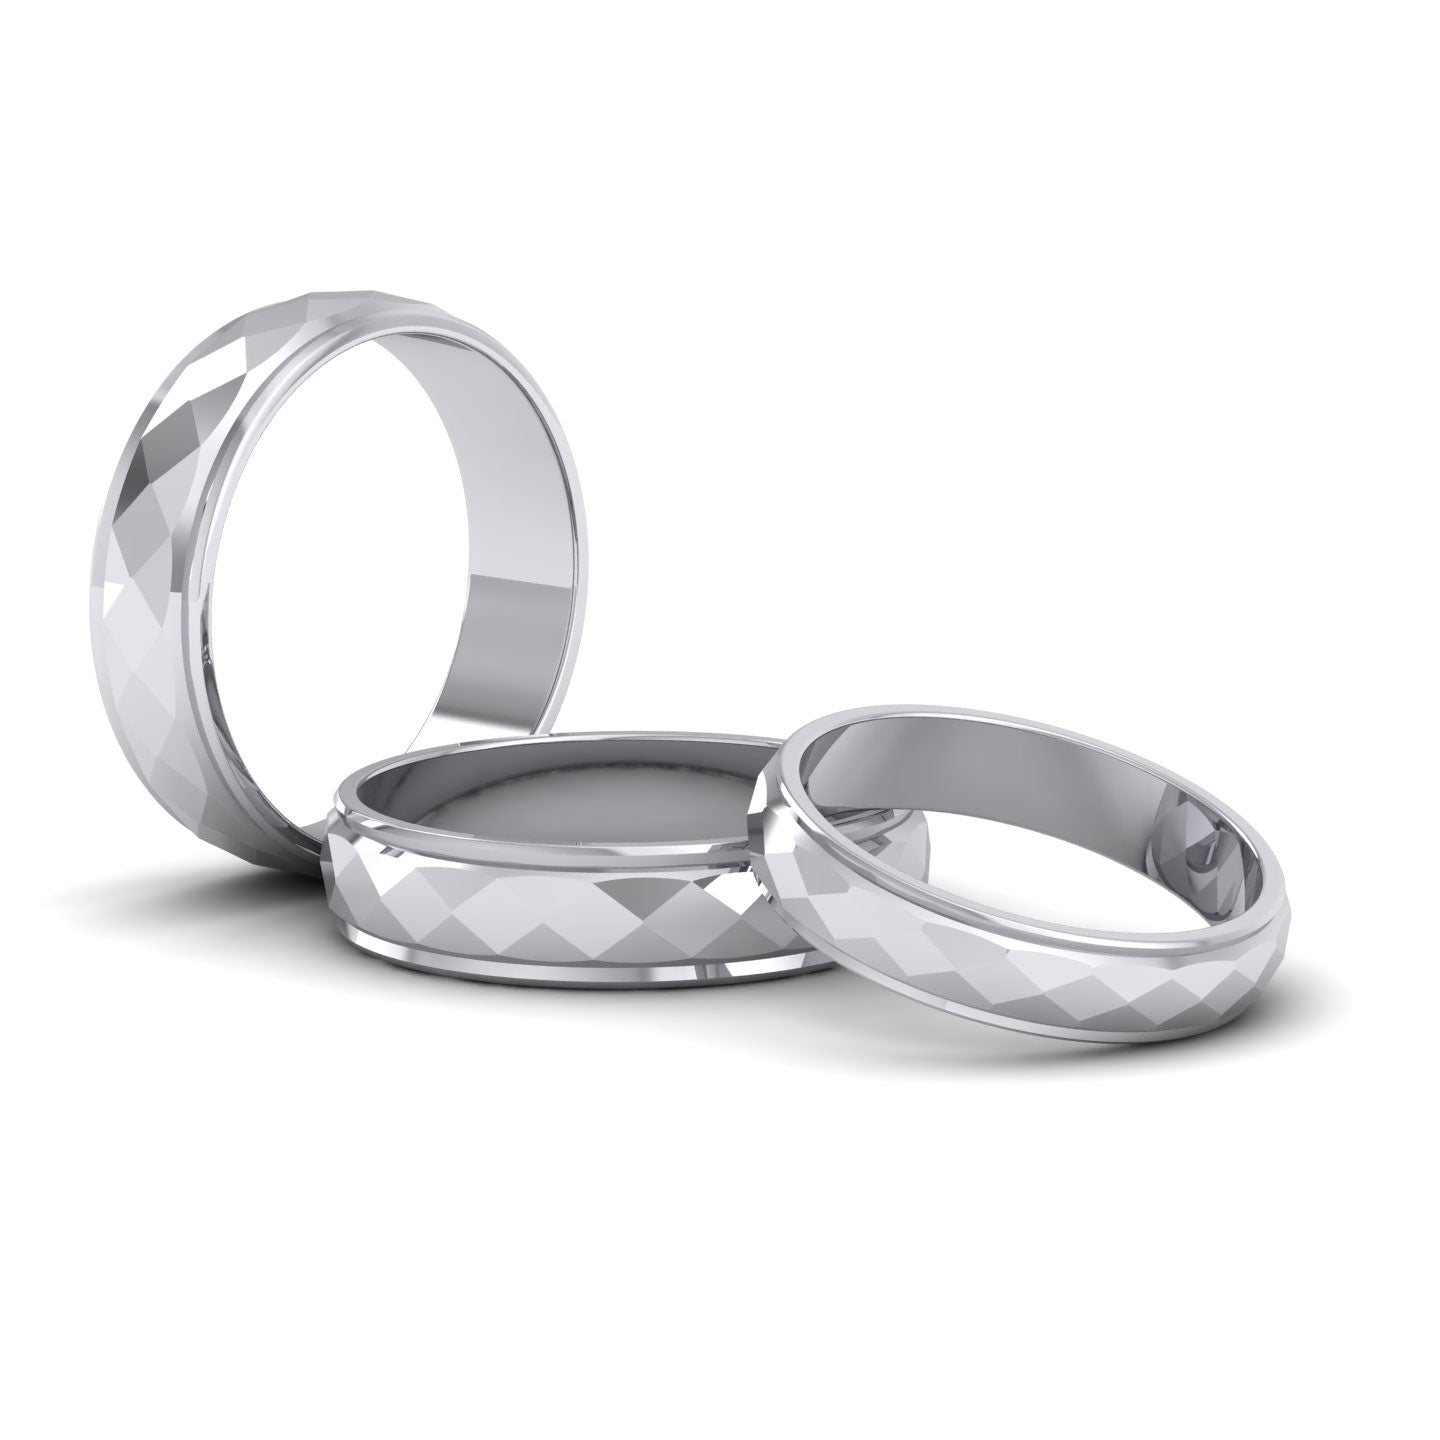 Facet And Line Pattern 9ct White Gold 6mm Wedding Ring